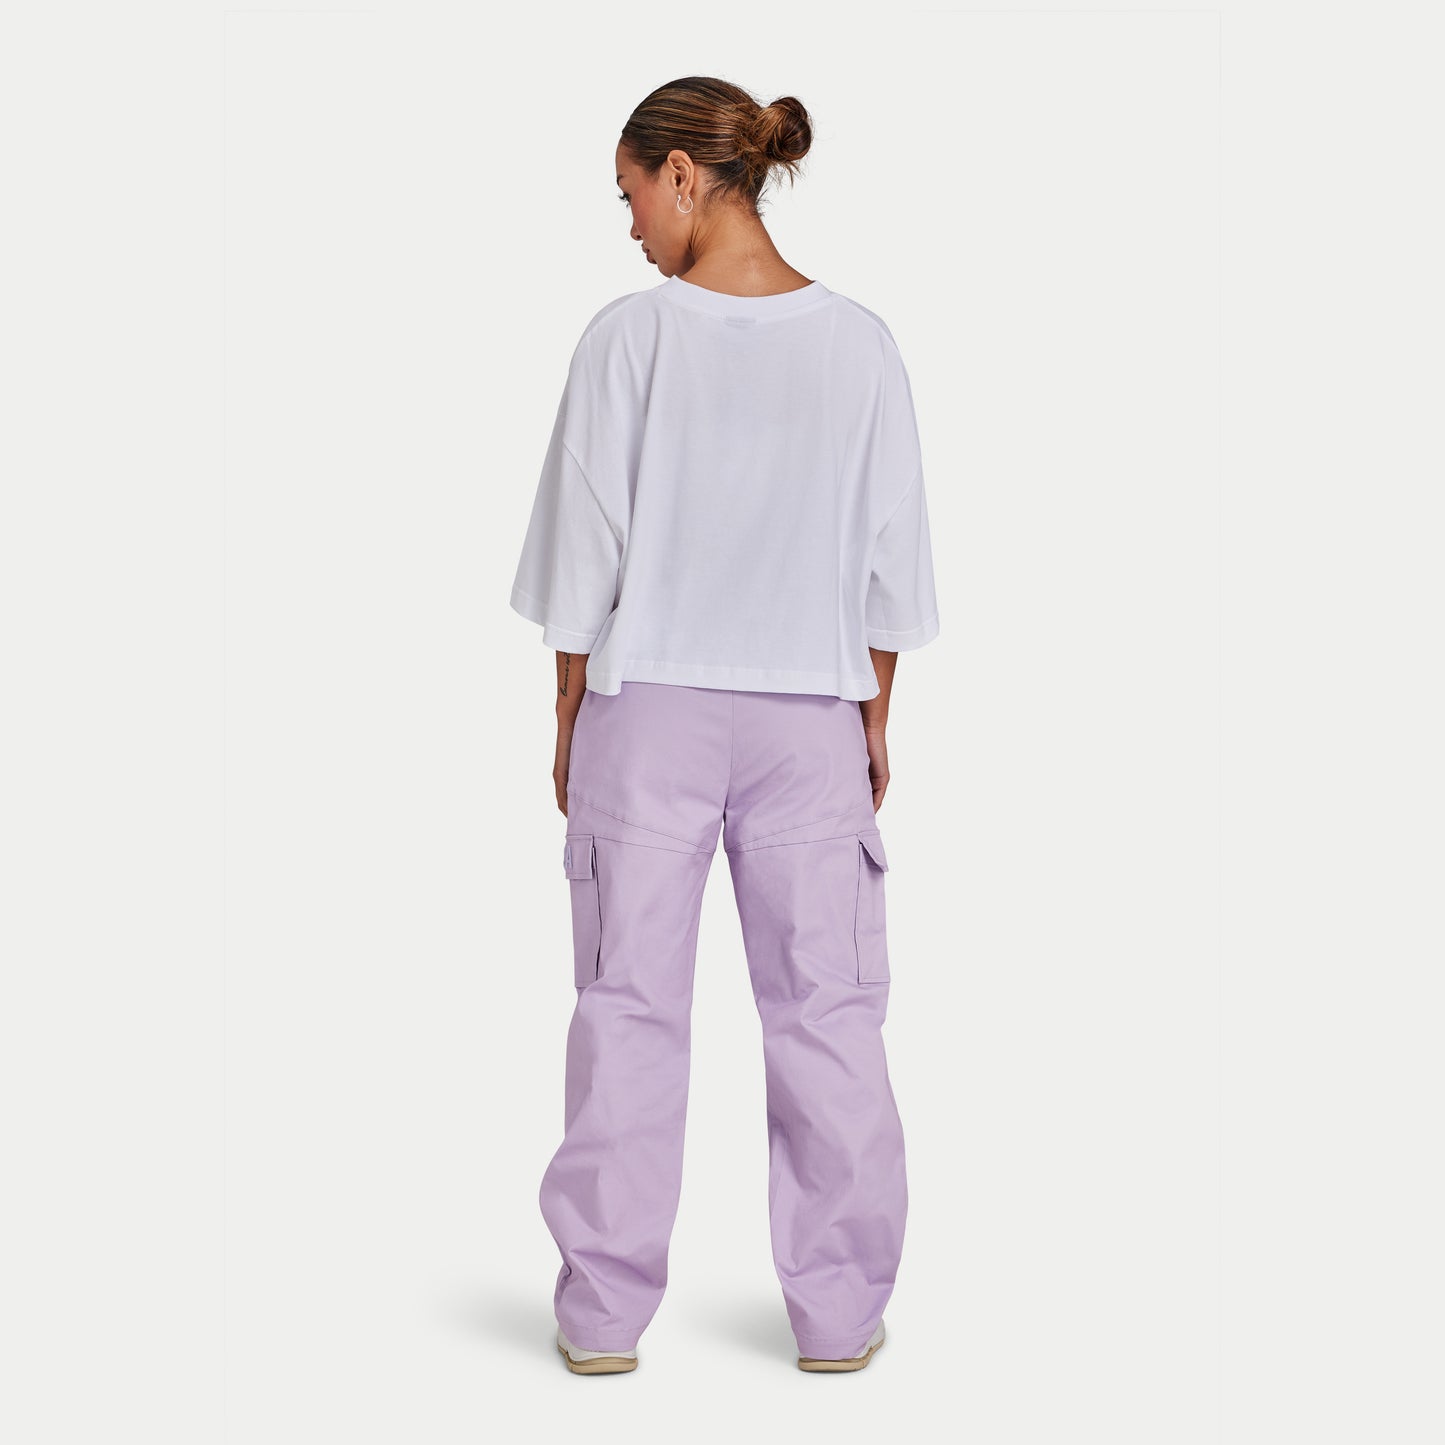 Womens Cargo Pant - Spring Lilac